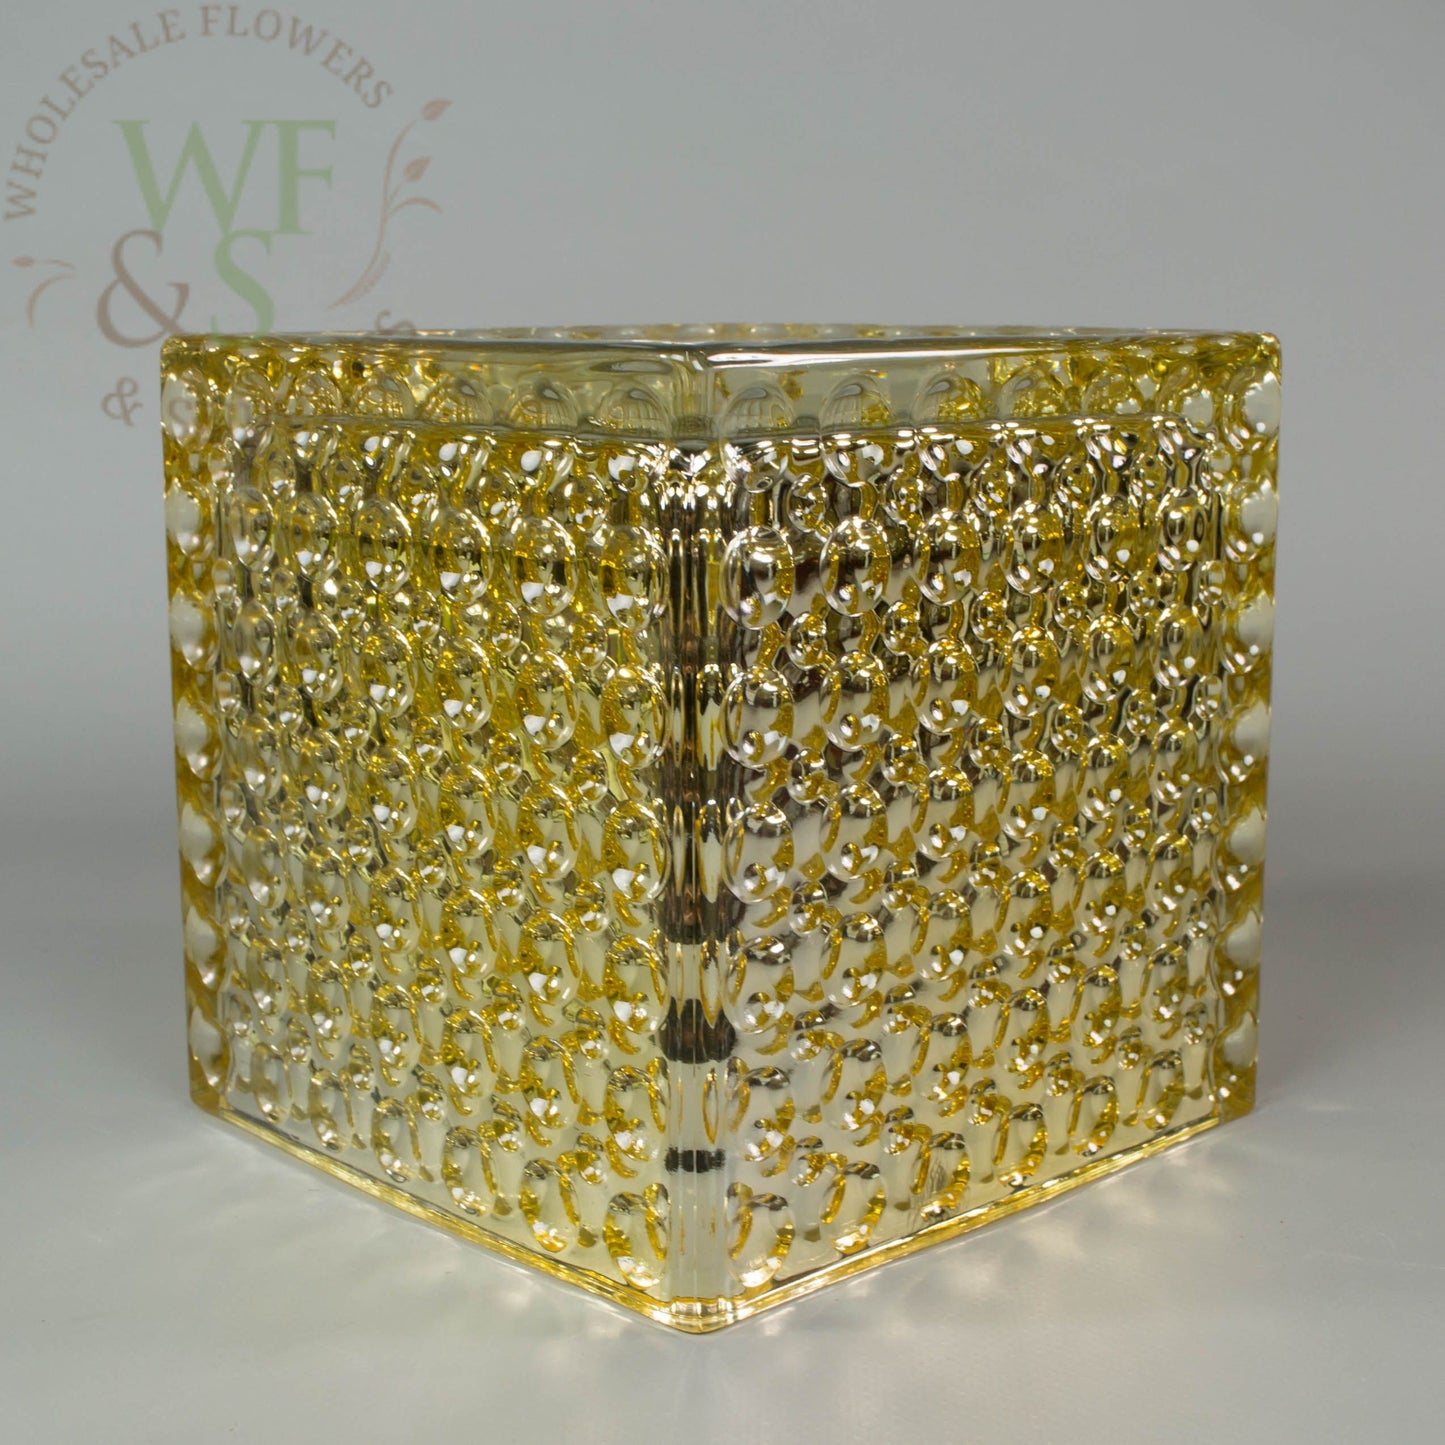 Square Gold Mirrored Glass Cube Vase Dimple Effect 4x4